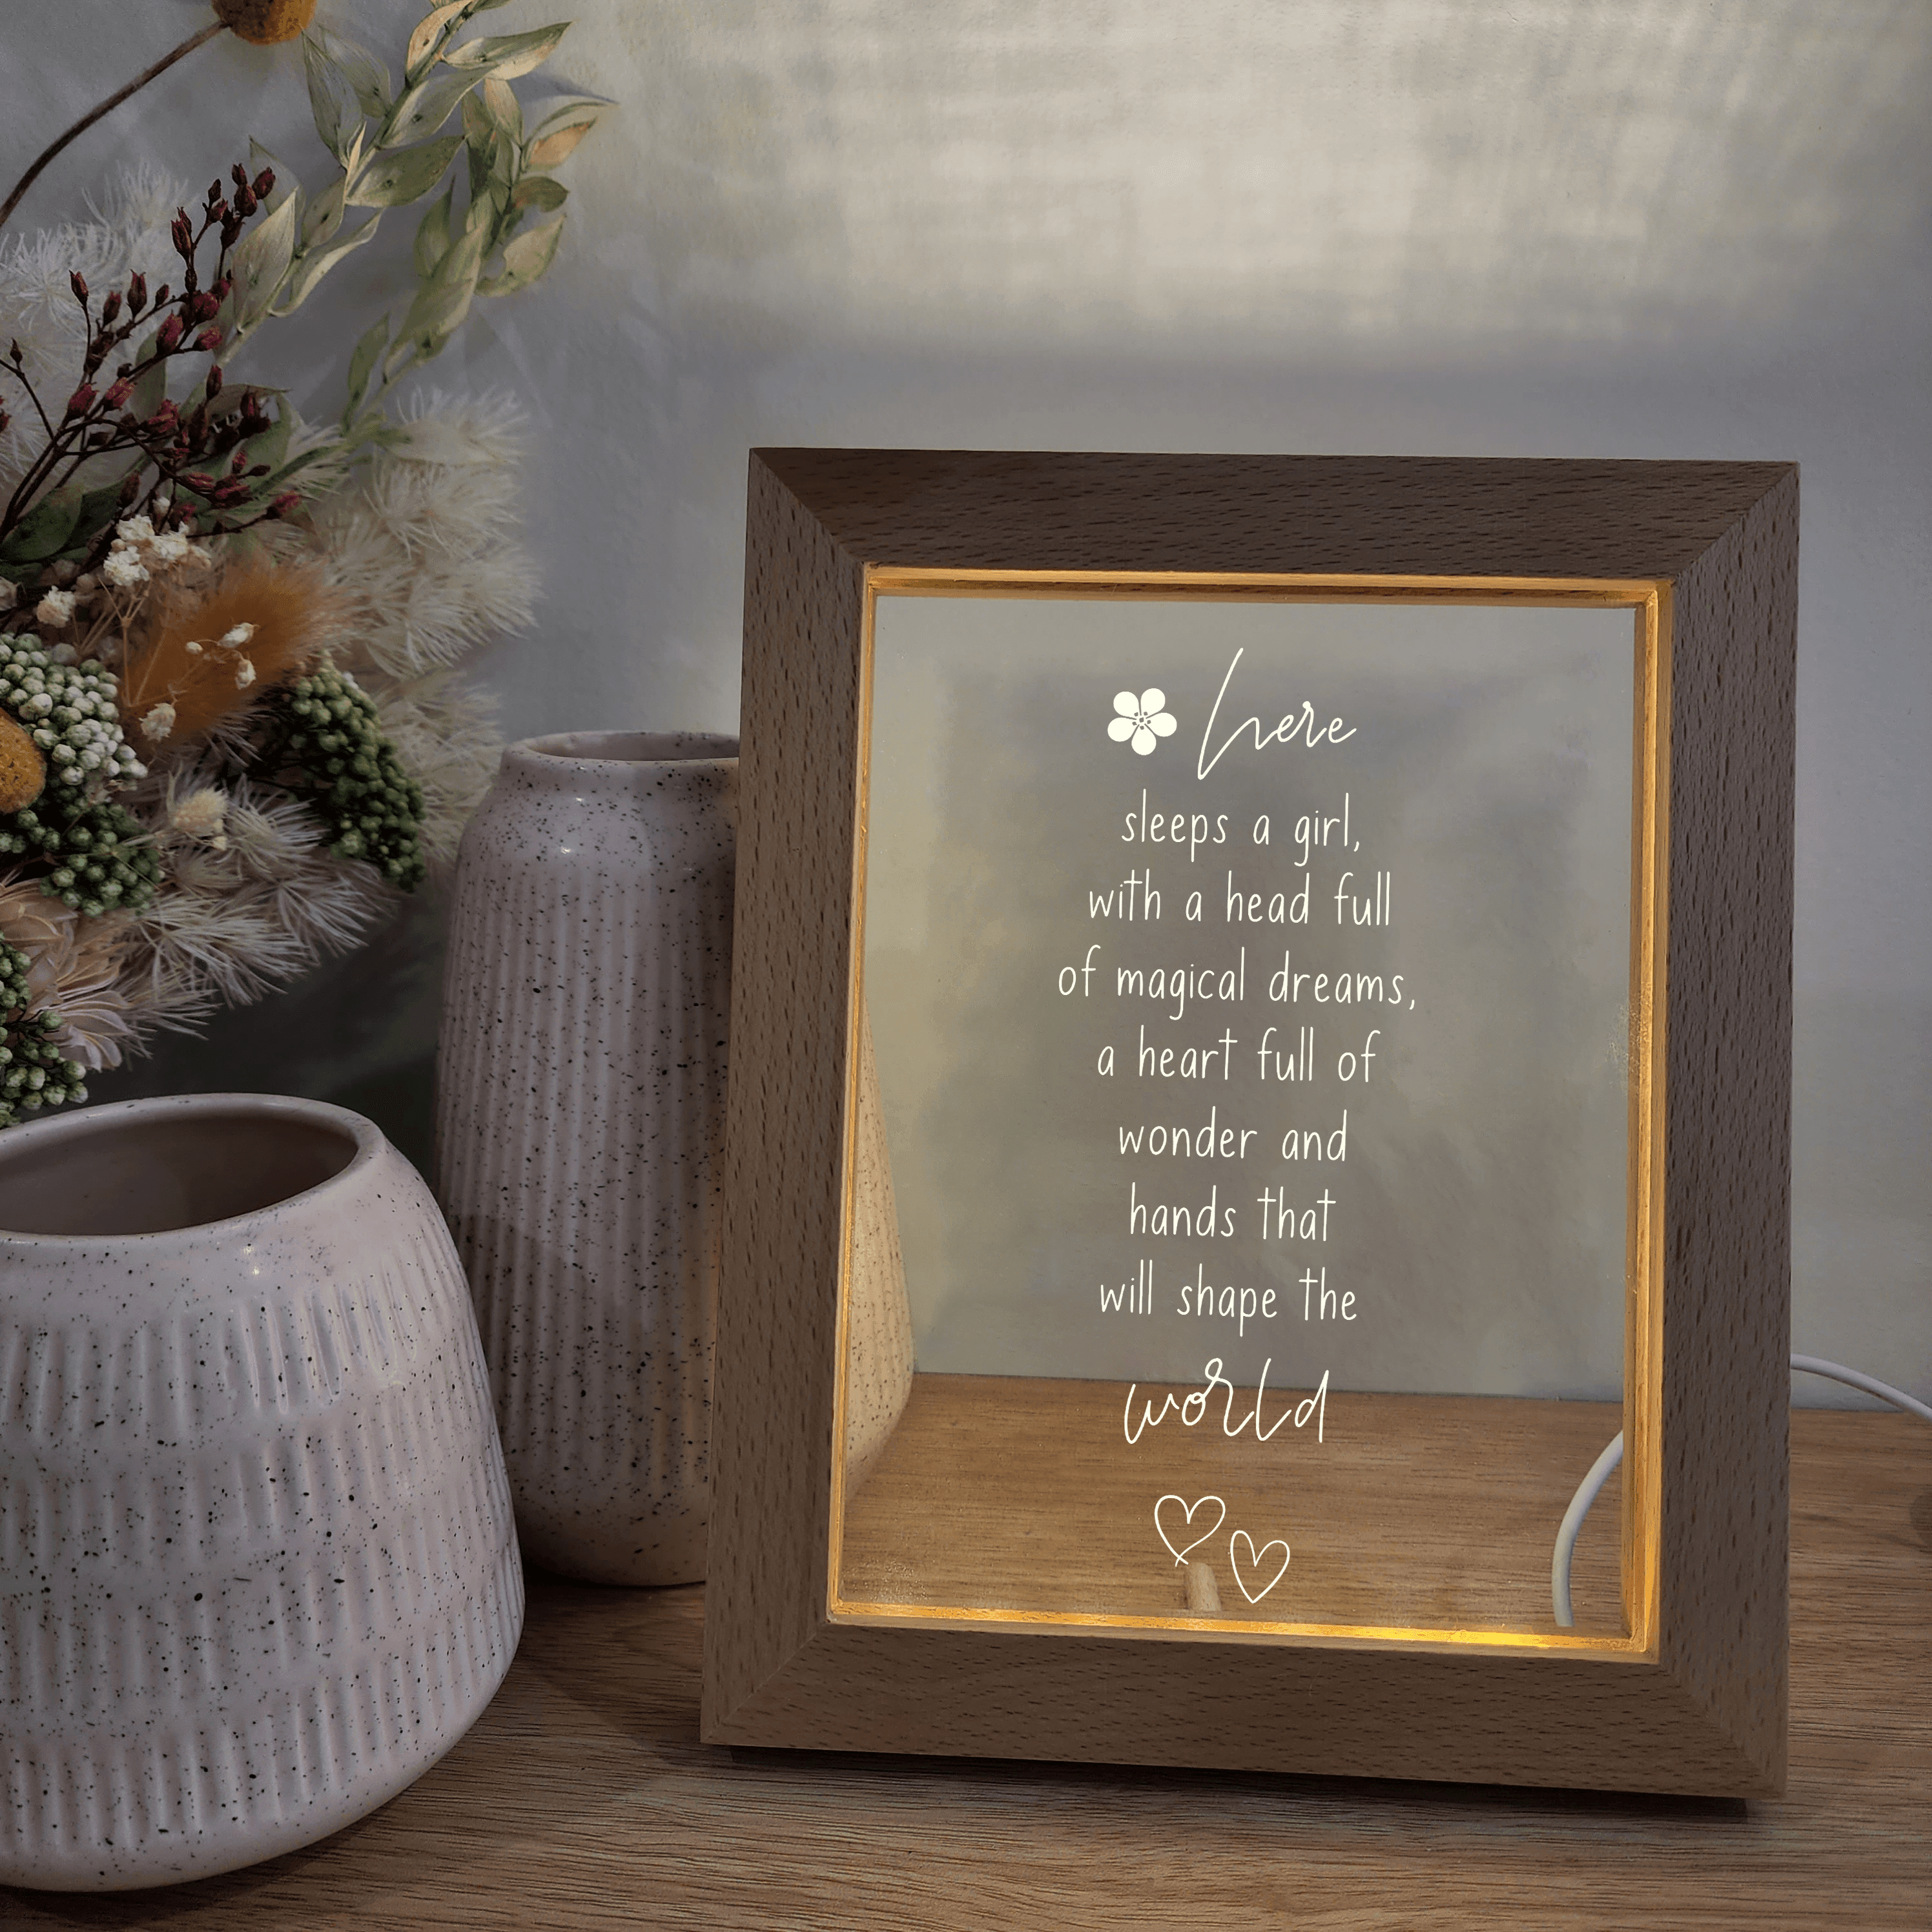 Timber Night Light Frame 🌙 - Quote - Here Sleeps a Girl - The Willow Corner